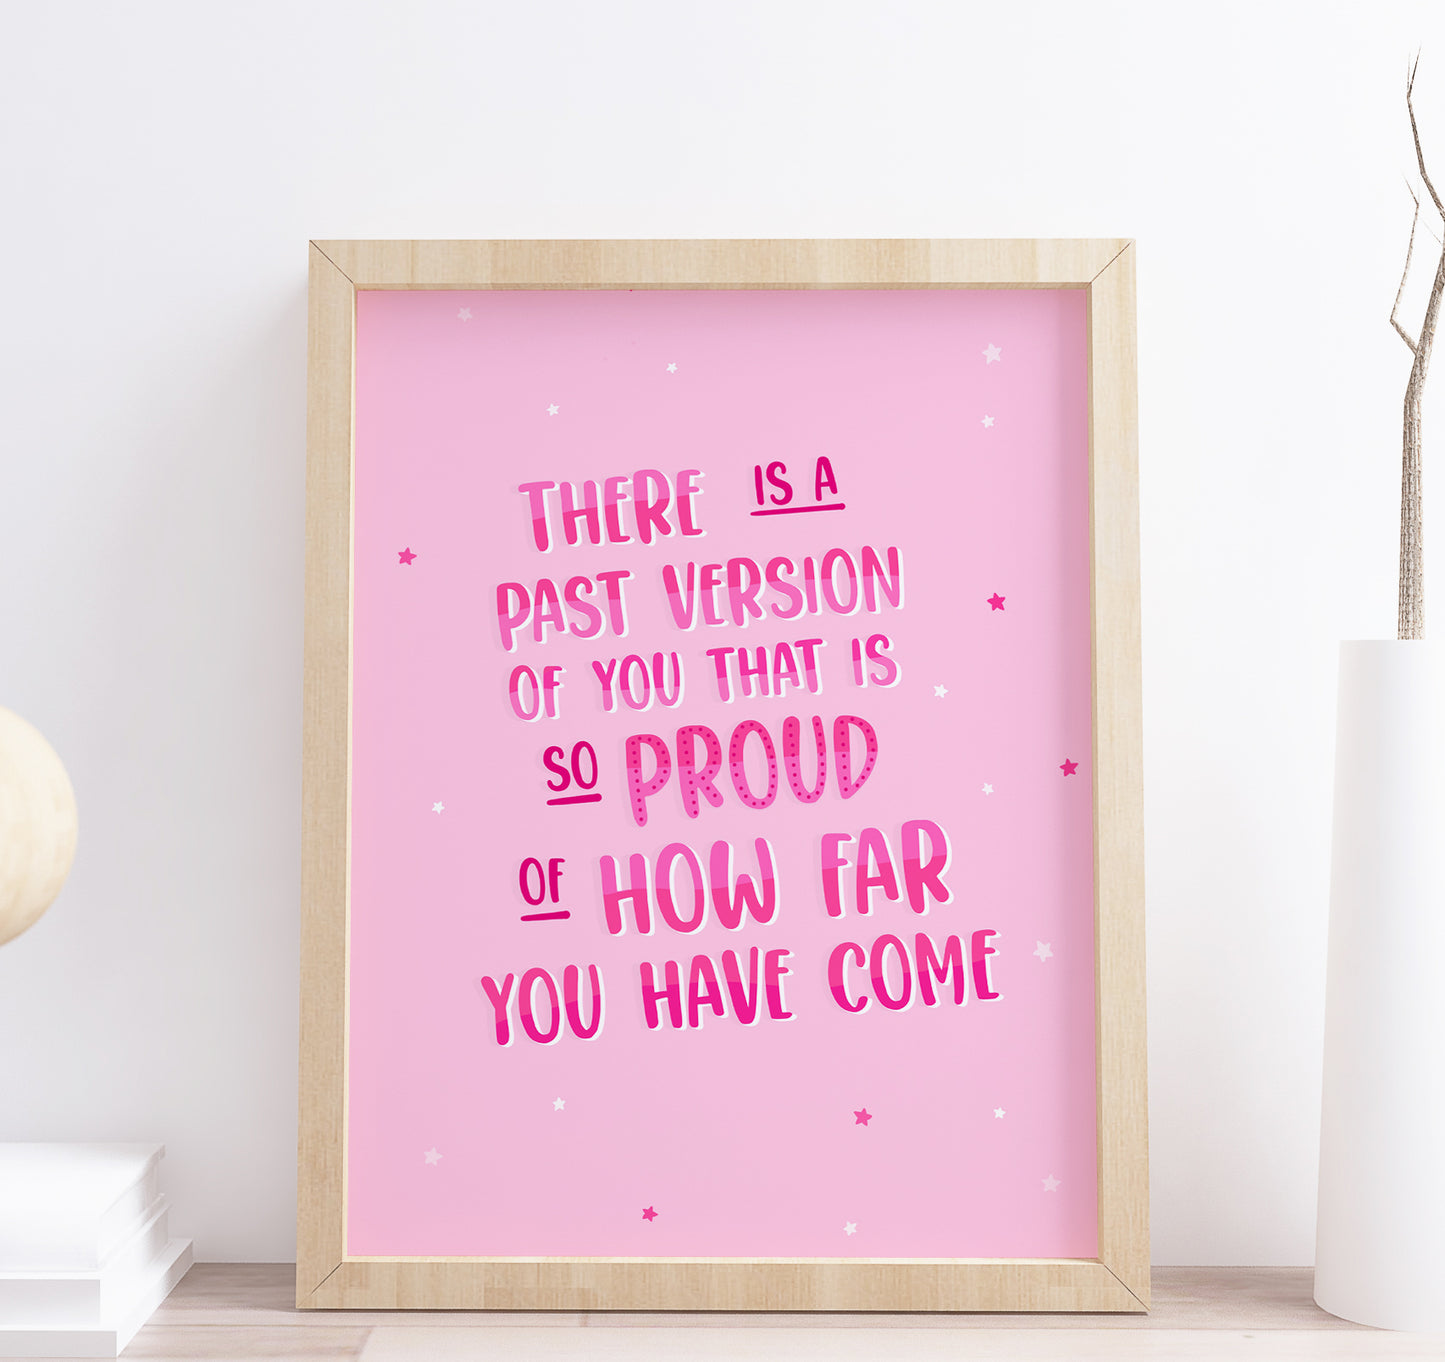 There is a past version motivational quote print